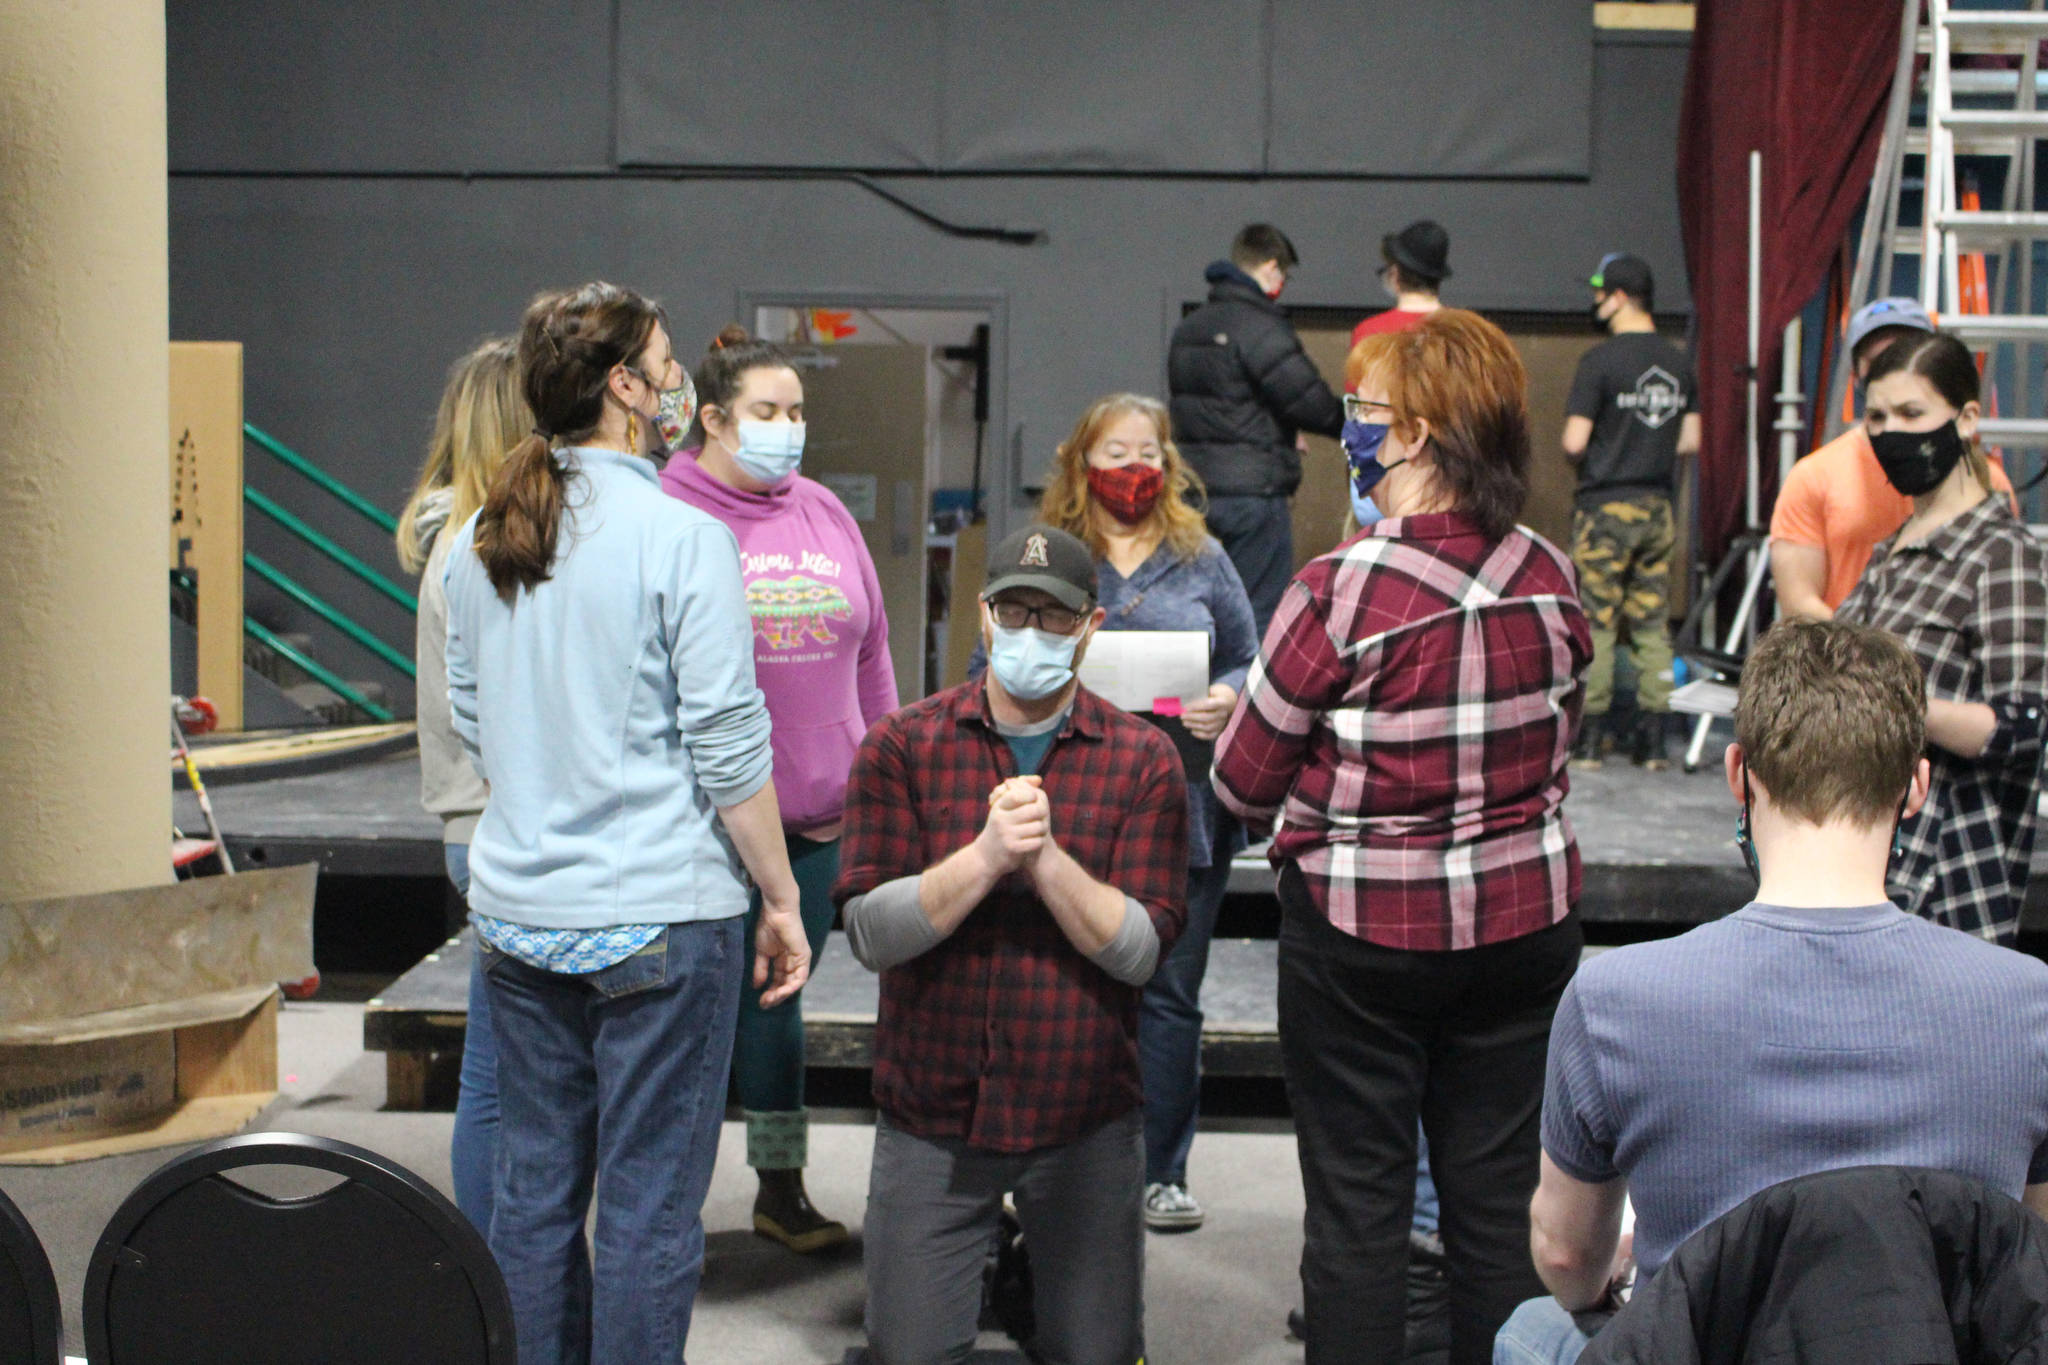 Members of the Kenai Performers rehearse a scene from “Murder in the Cathedral” at the Kenai Performers black box theater in Soldotna, Alaska, on Jan. 16, 2021. (Photo by Brian Mazurek/Peninsula Clarion)